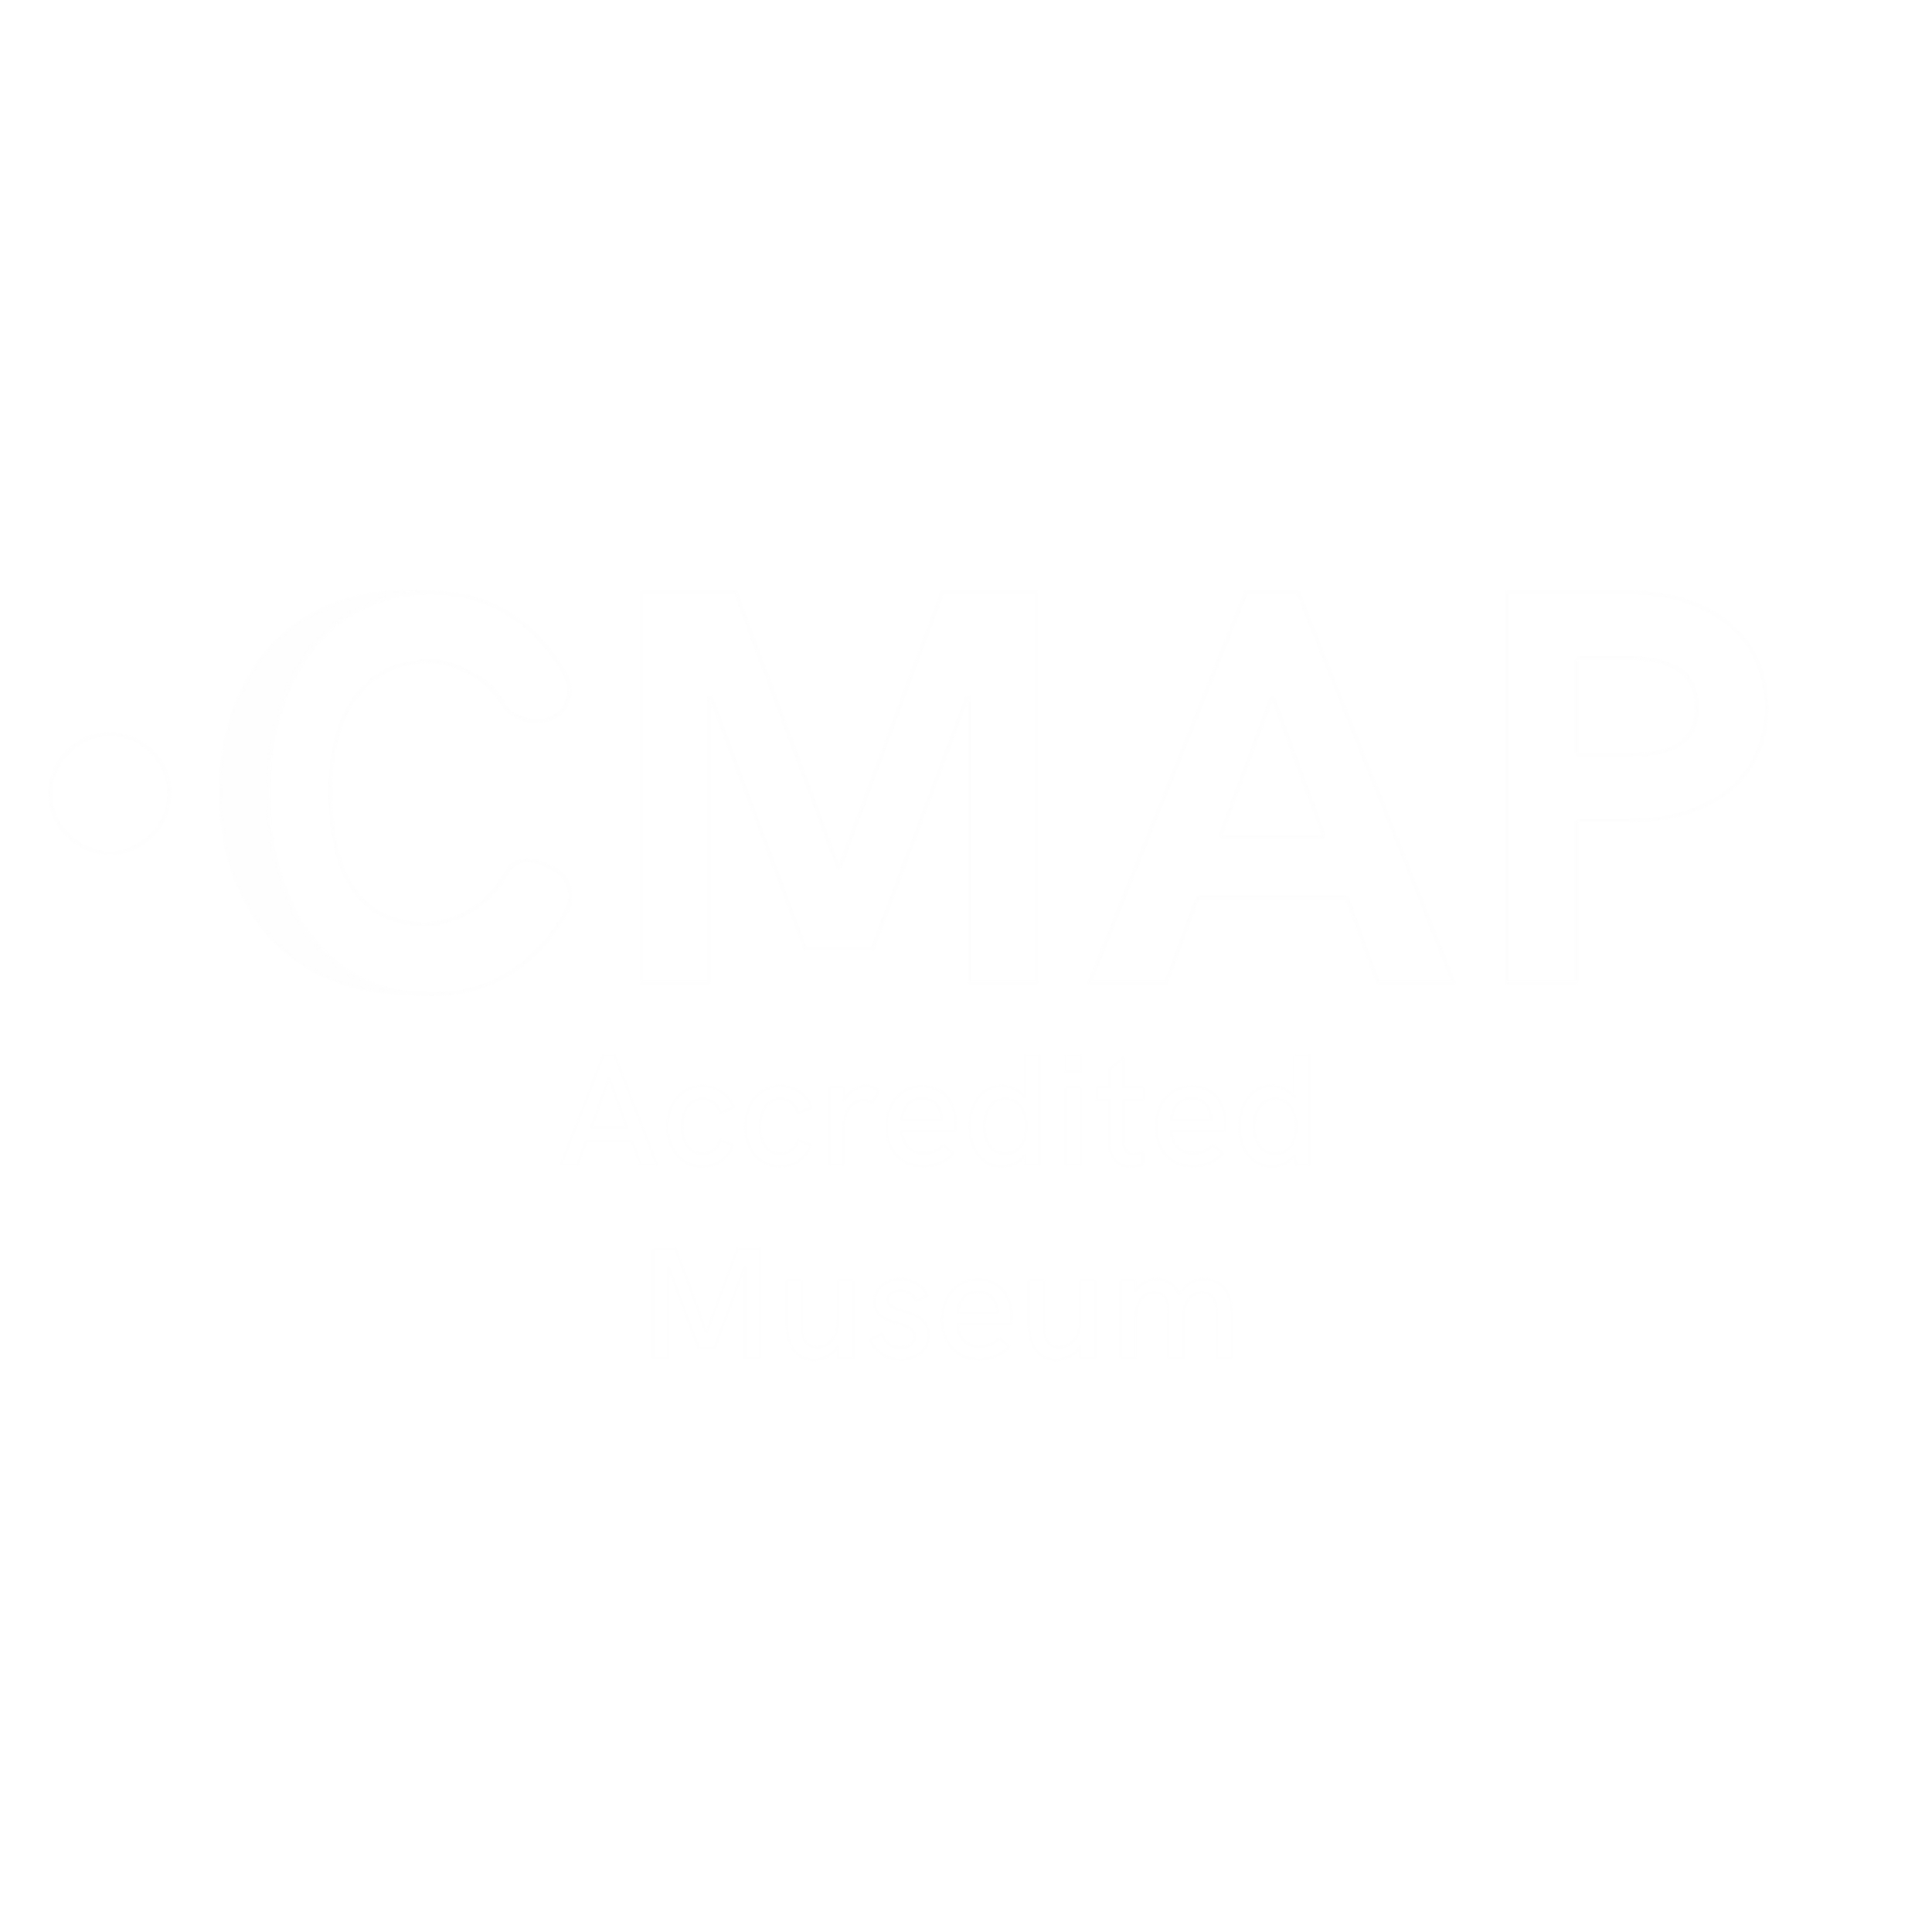 CMAP Accredited Museum (W) logo edited